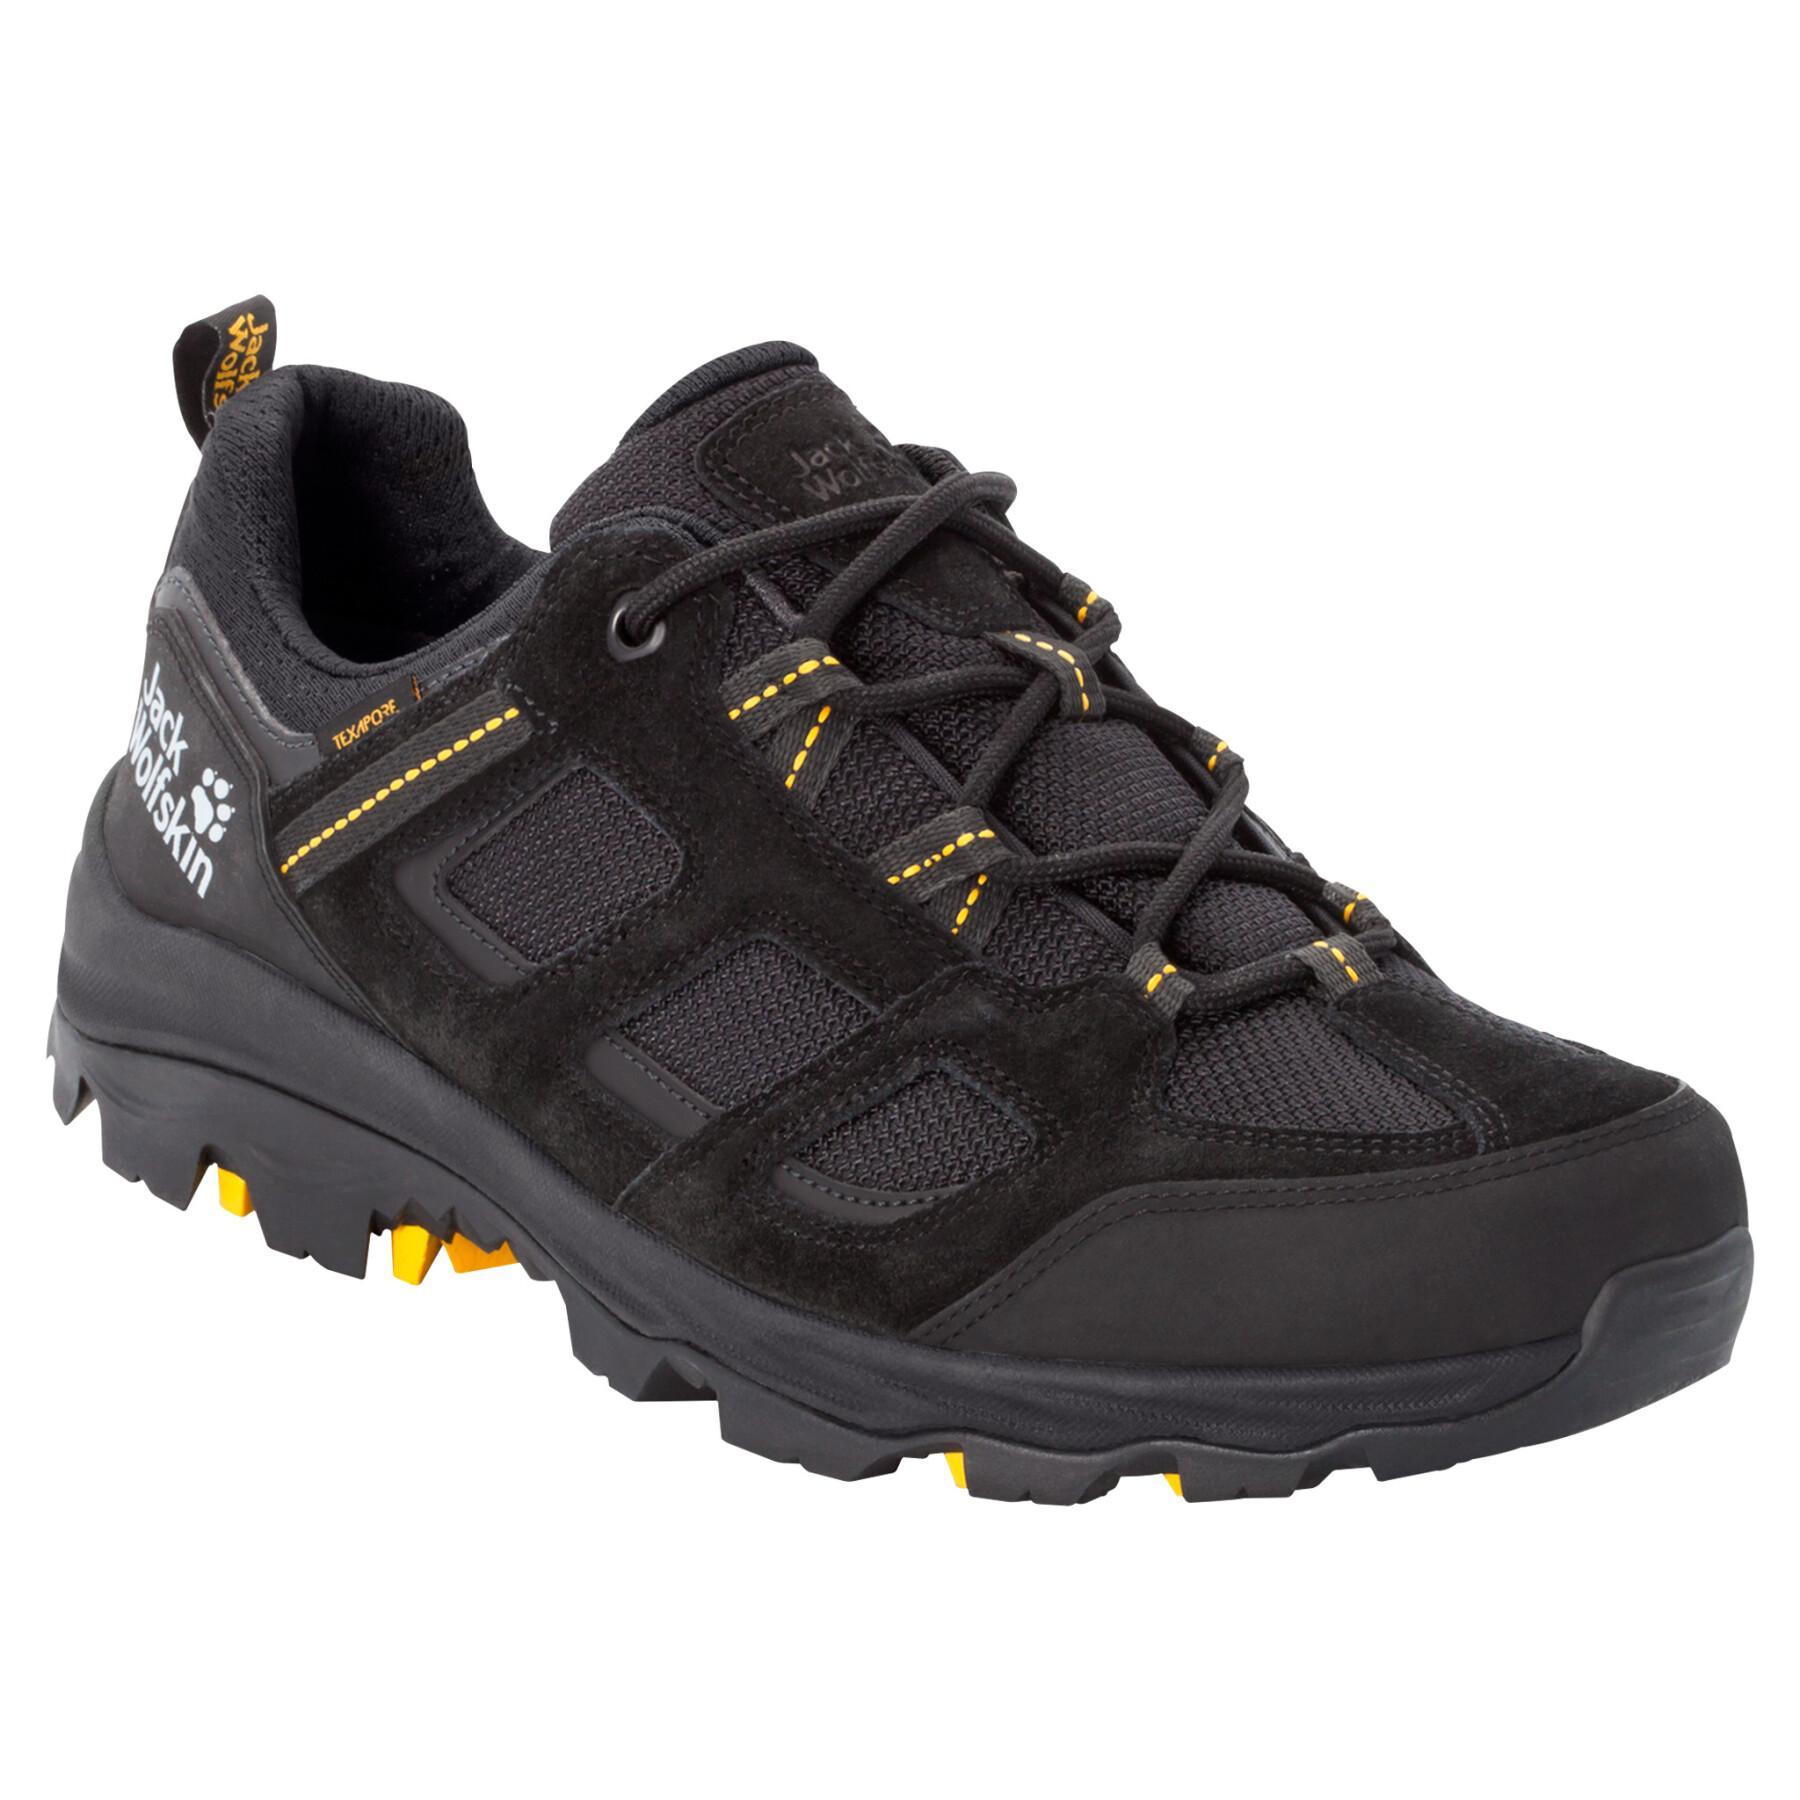 Hiking shoes Jack Wolfskin vojo 3 texapore low